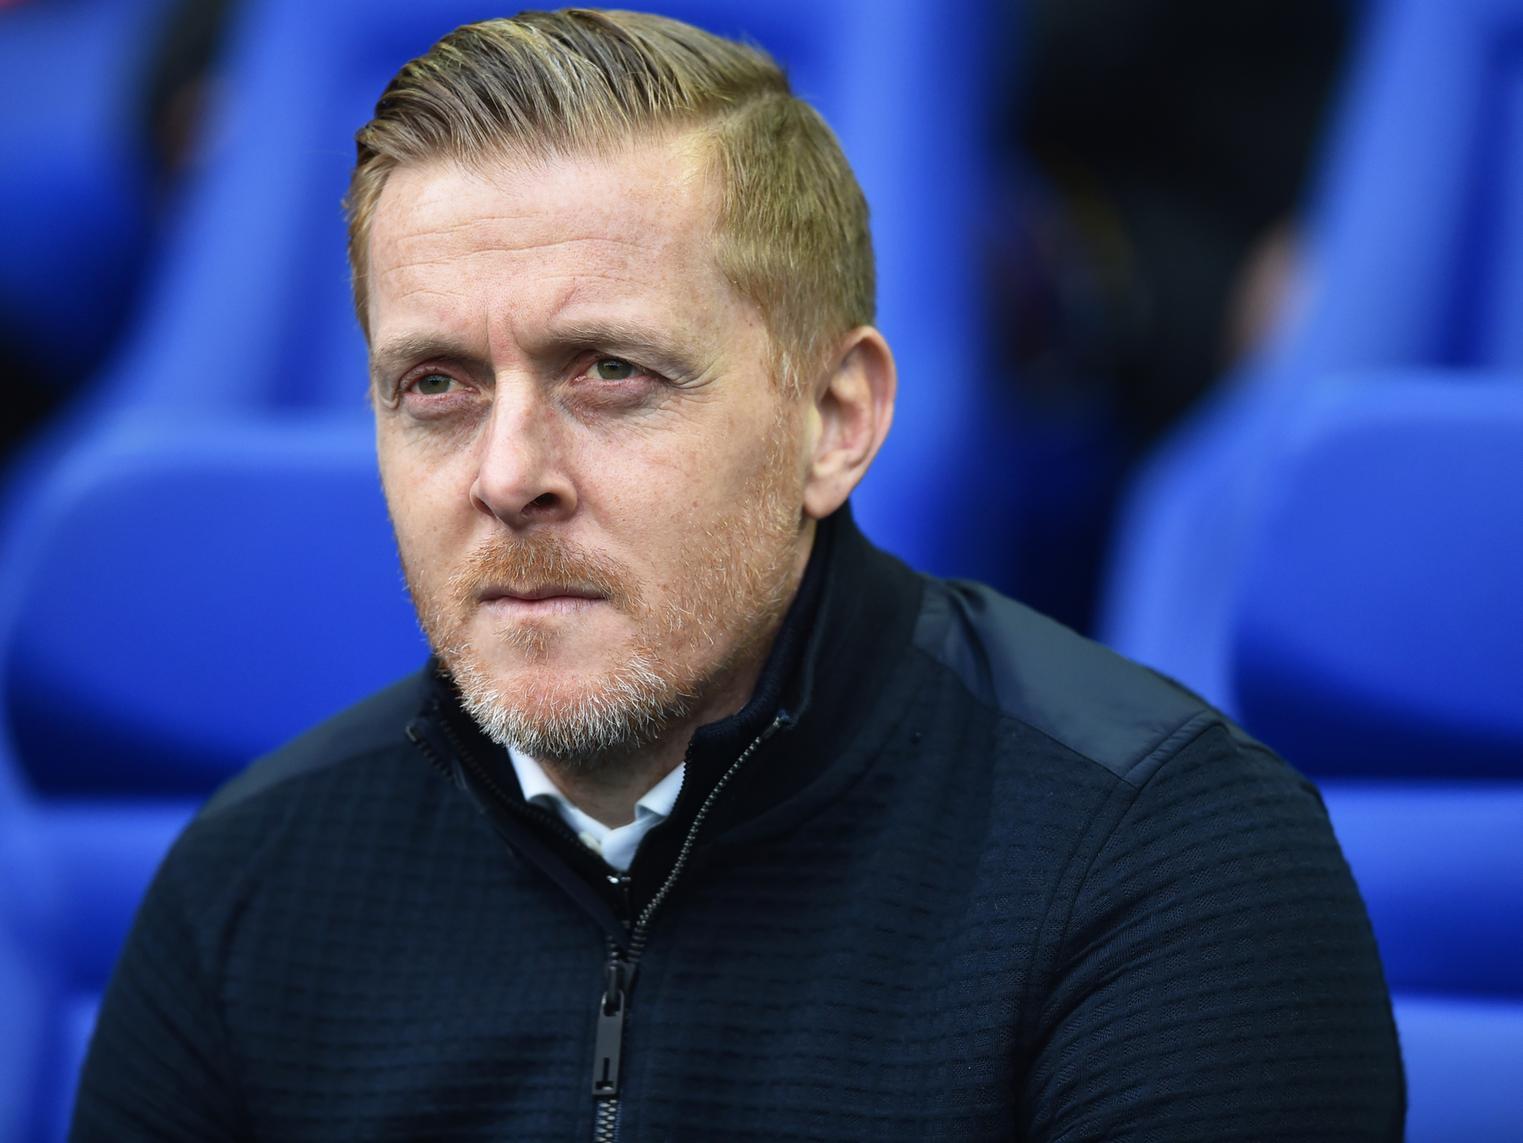 Sheffield Wednesday boss Garry Monk has accepted full responsibilityfor his side's dire run of form, and has vowed to fight to help the club turn around their fortunes this season. (BBC Sport)